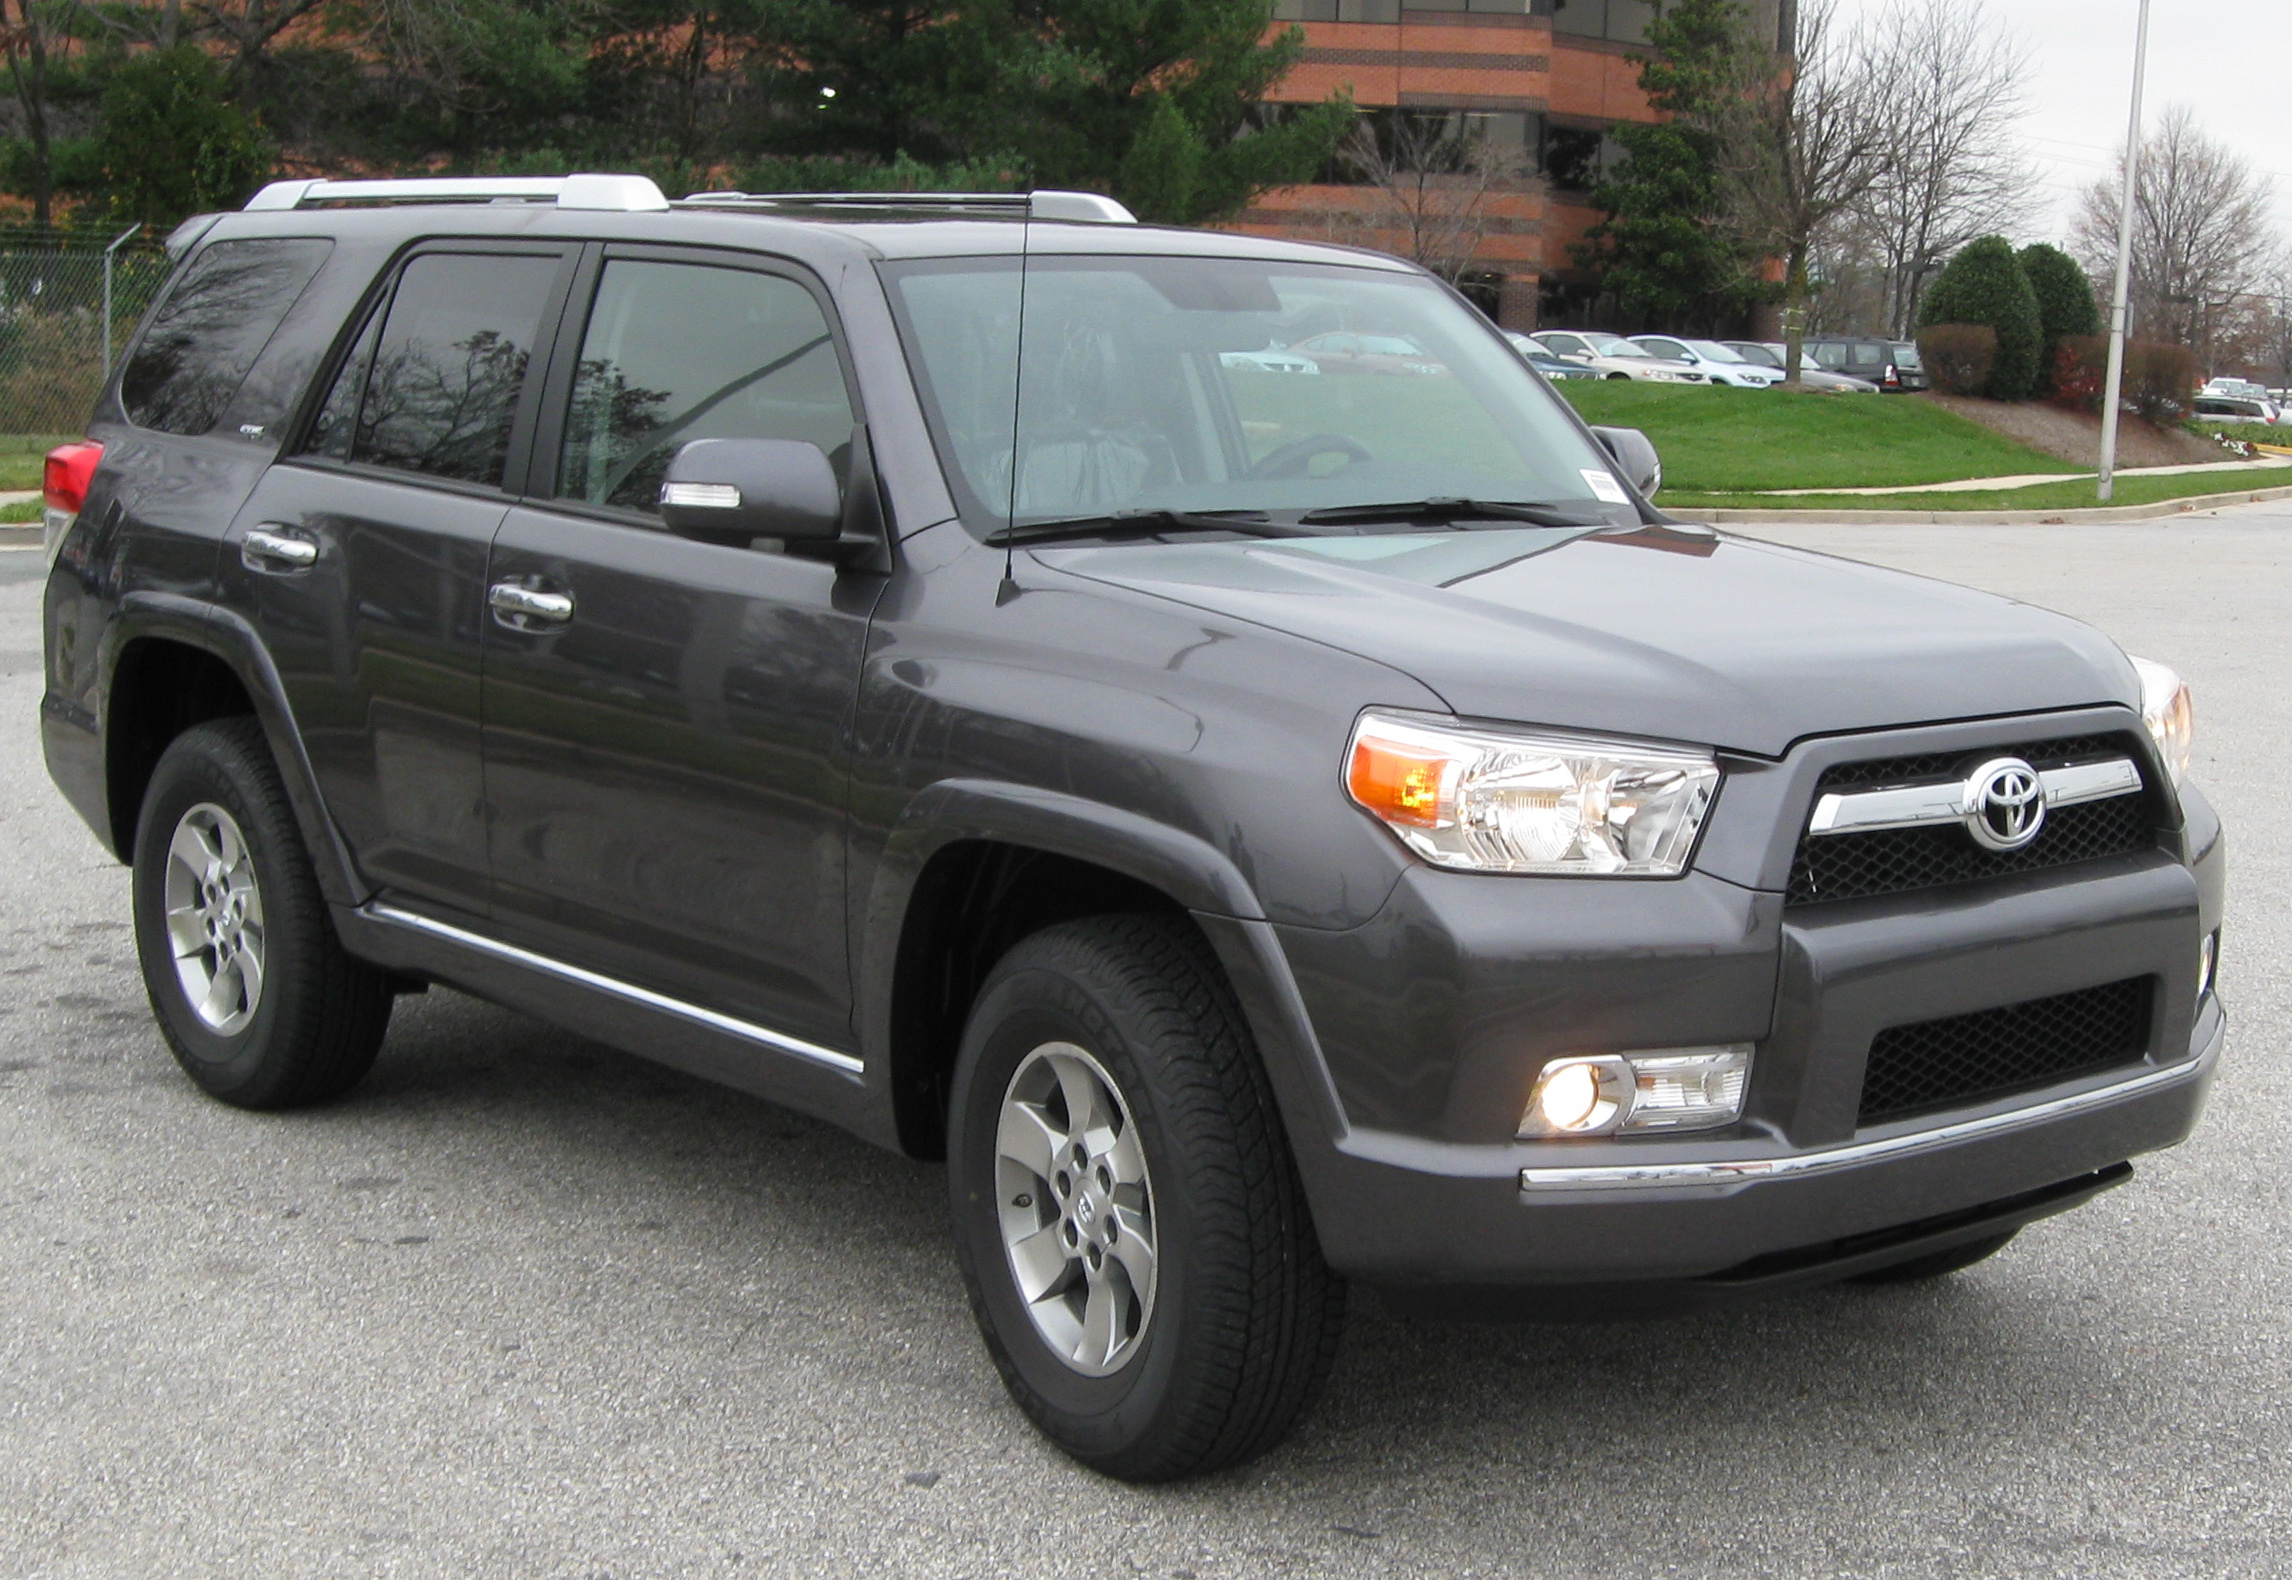 The invisible Toyota 4Runner